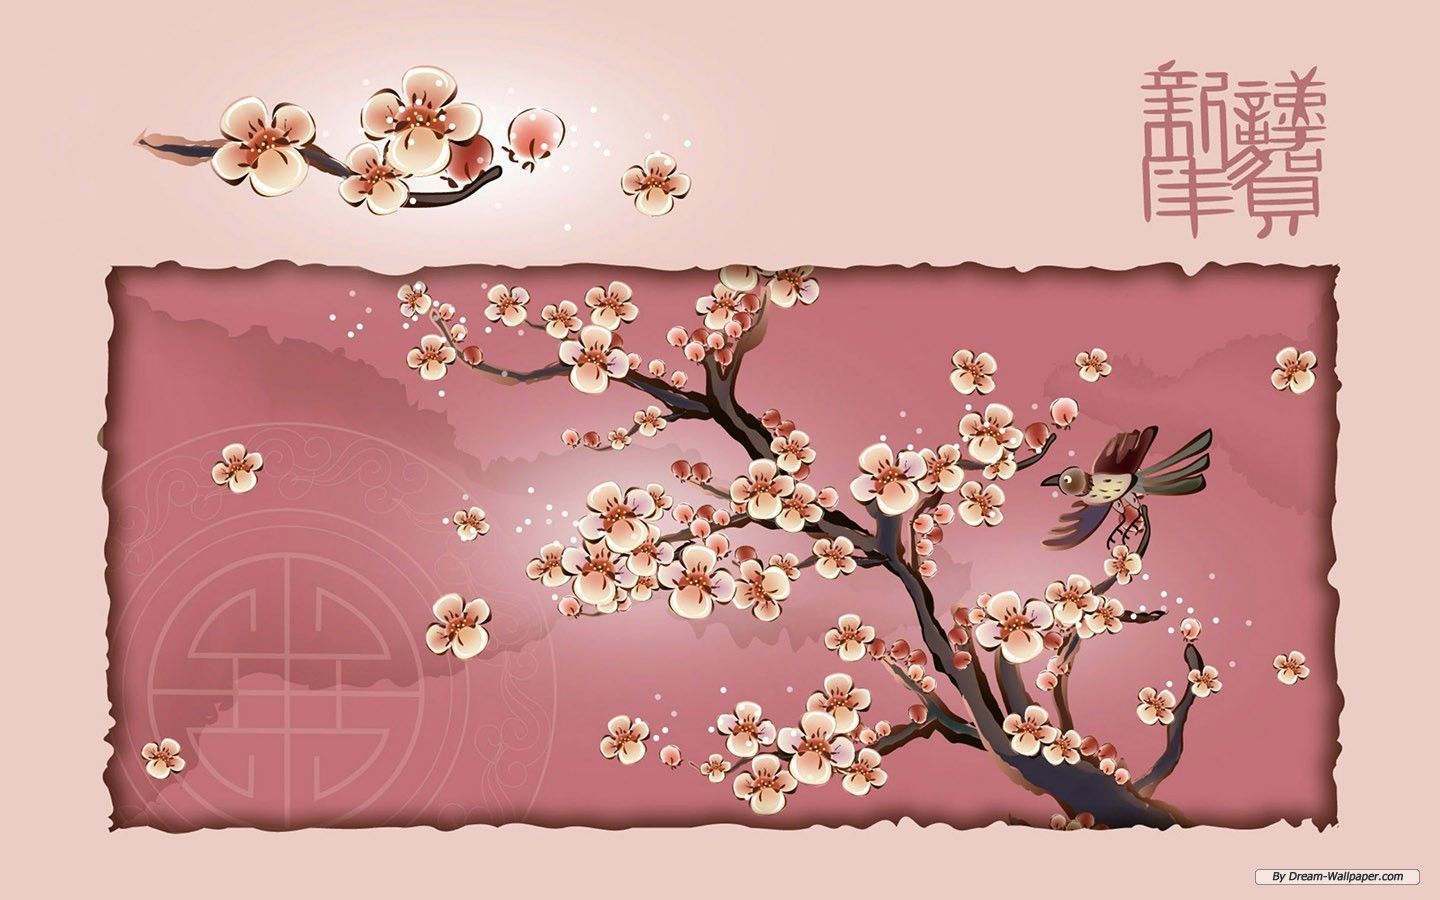 Free Wallpaper - Free Holiday wallpaper - Chinese New Year ...